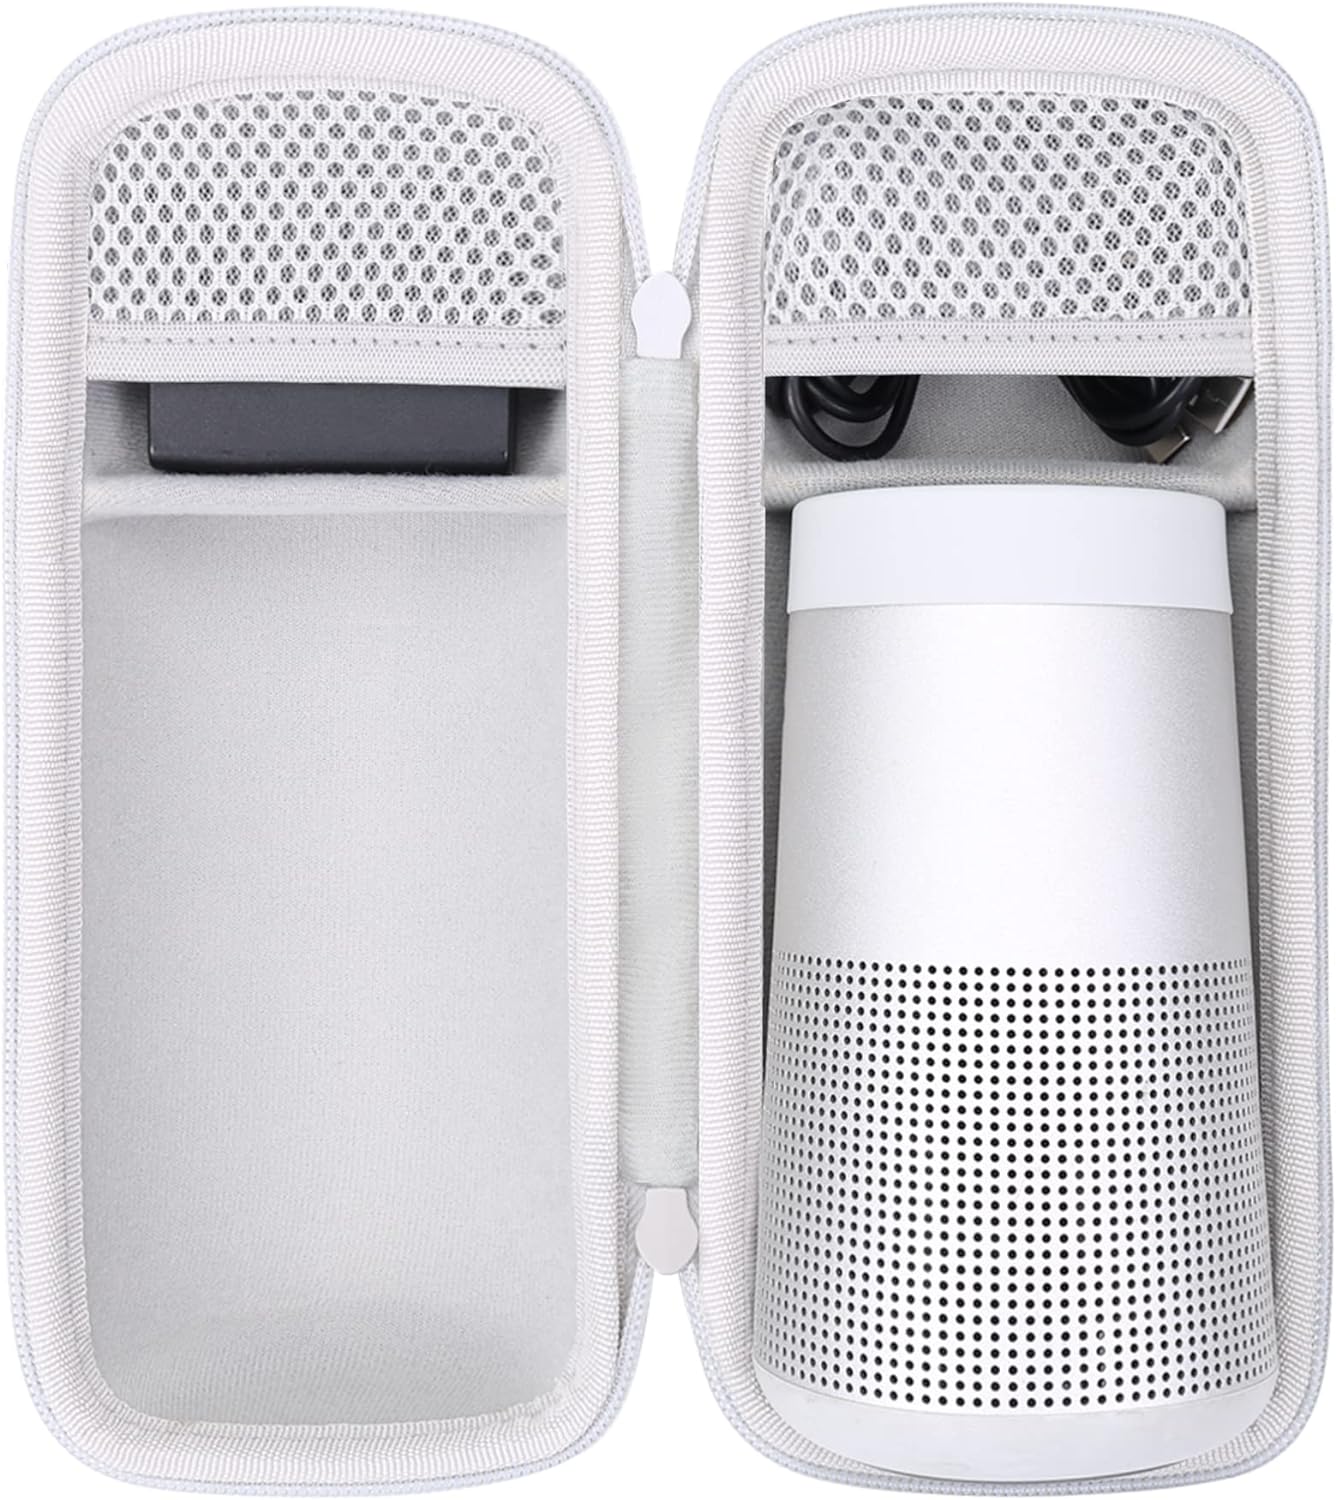 co2CREA Hard Case Replacement for Bose SoundLink Revolve Series II Portable Bluetooth Speaker, Silver Grey Case